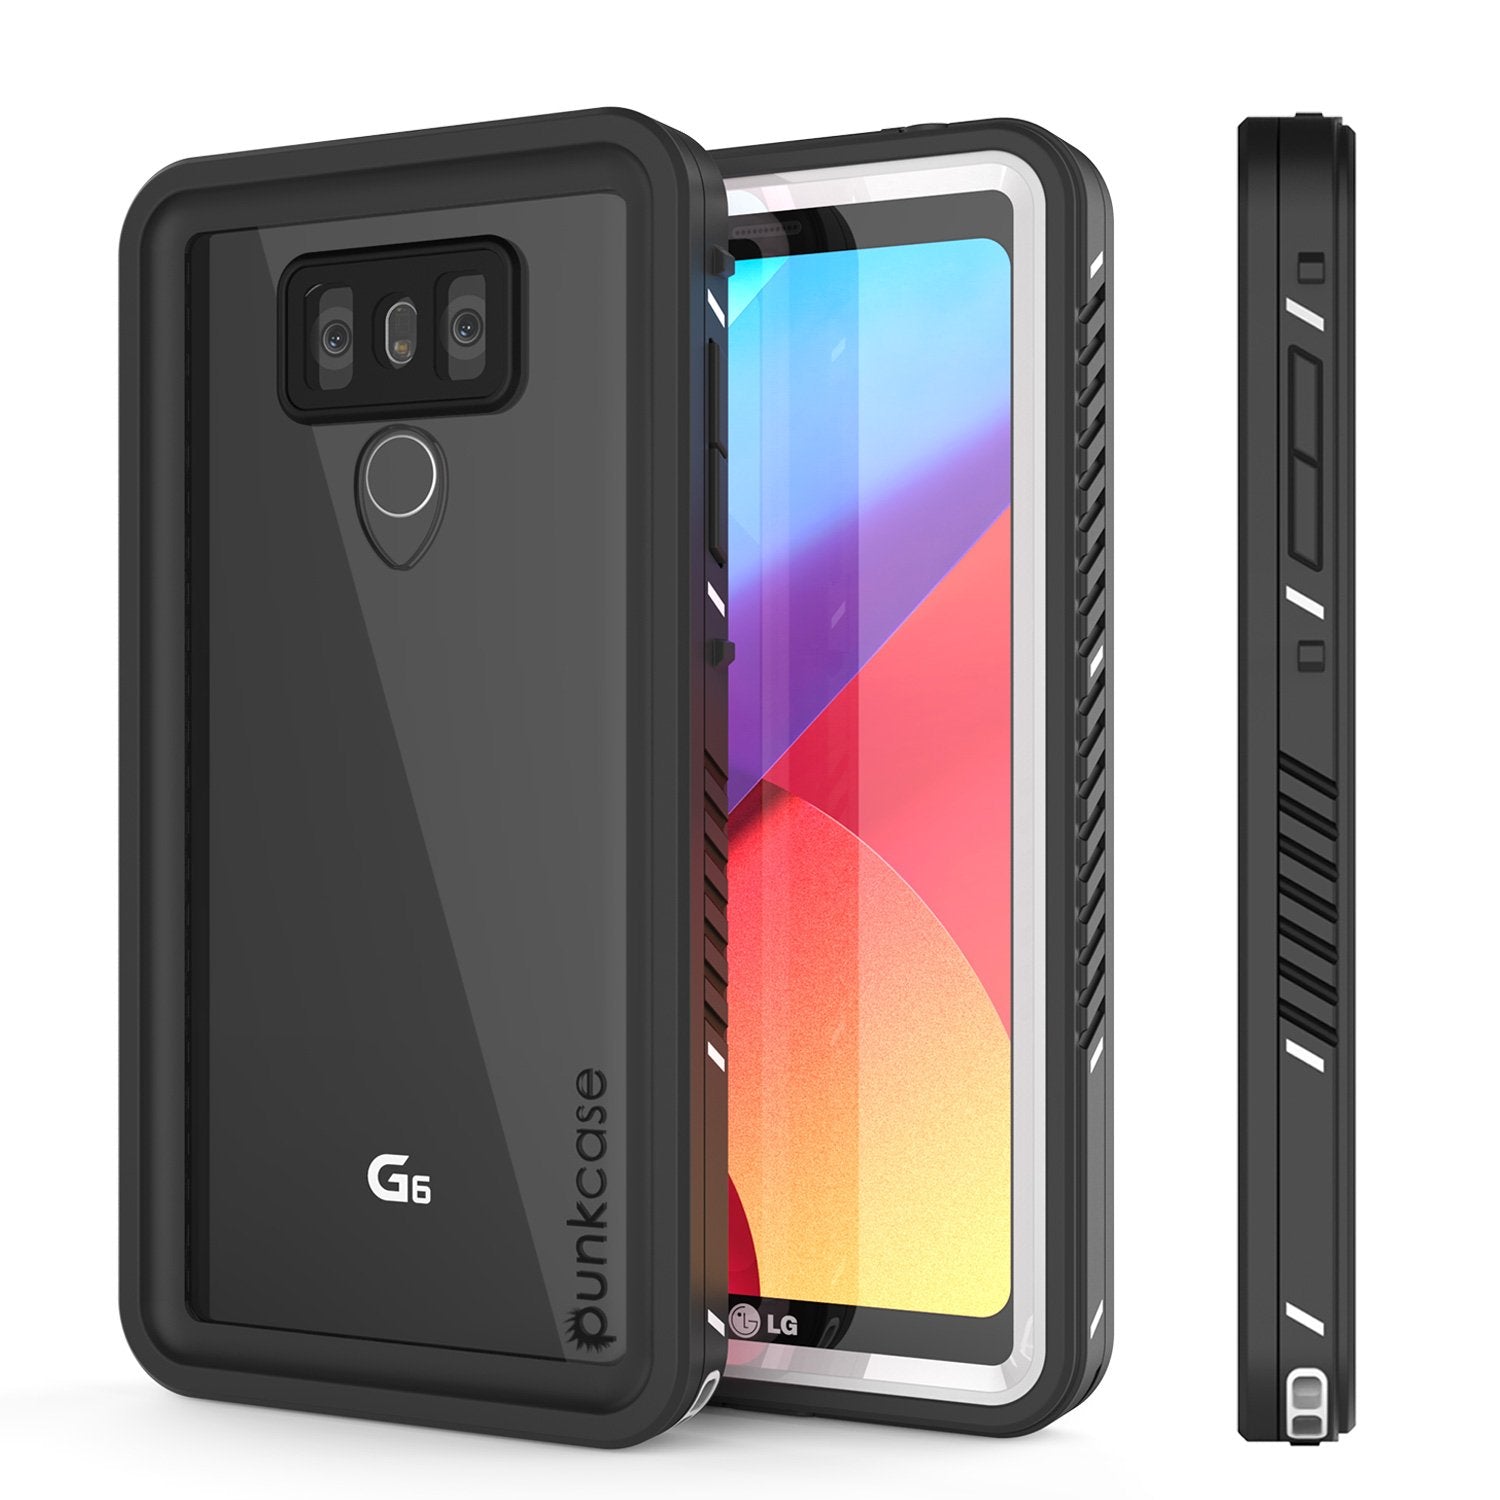 LG G6 Waterproof Case, Punkcase [Extreme Series] [Slim Fit] [IP68 Certified] [Shockproof] [Snowproof] [Dirproof] Armor Cover W/ Built In Screen Protector for LG G6 [WHITE]